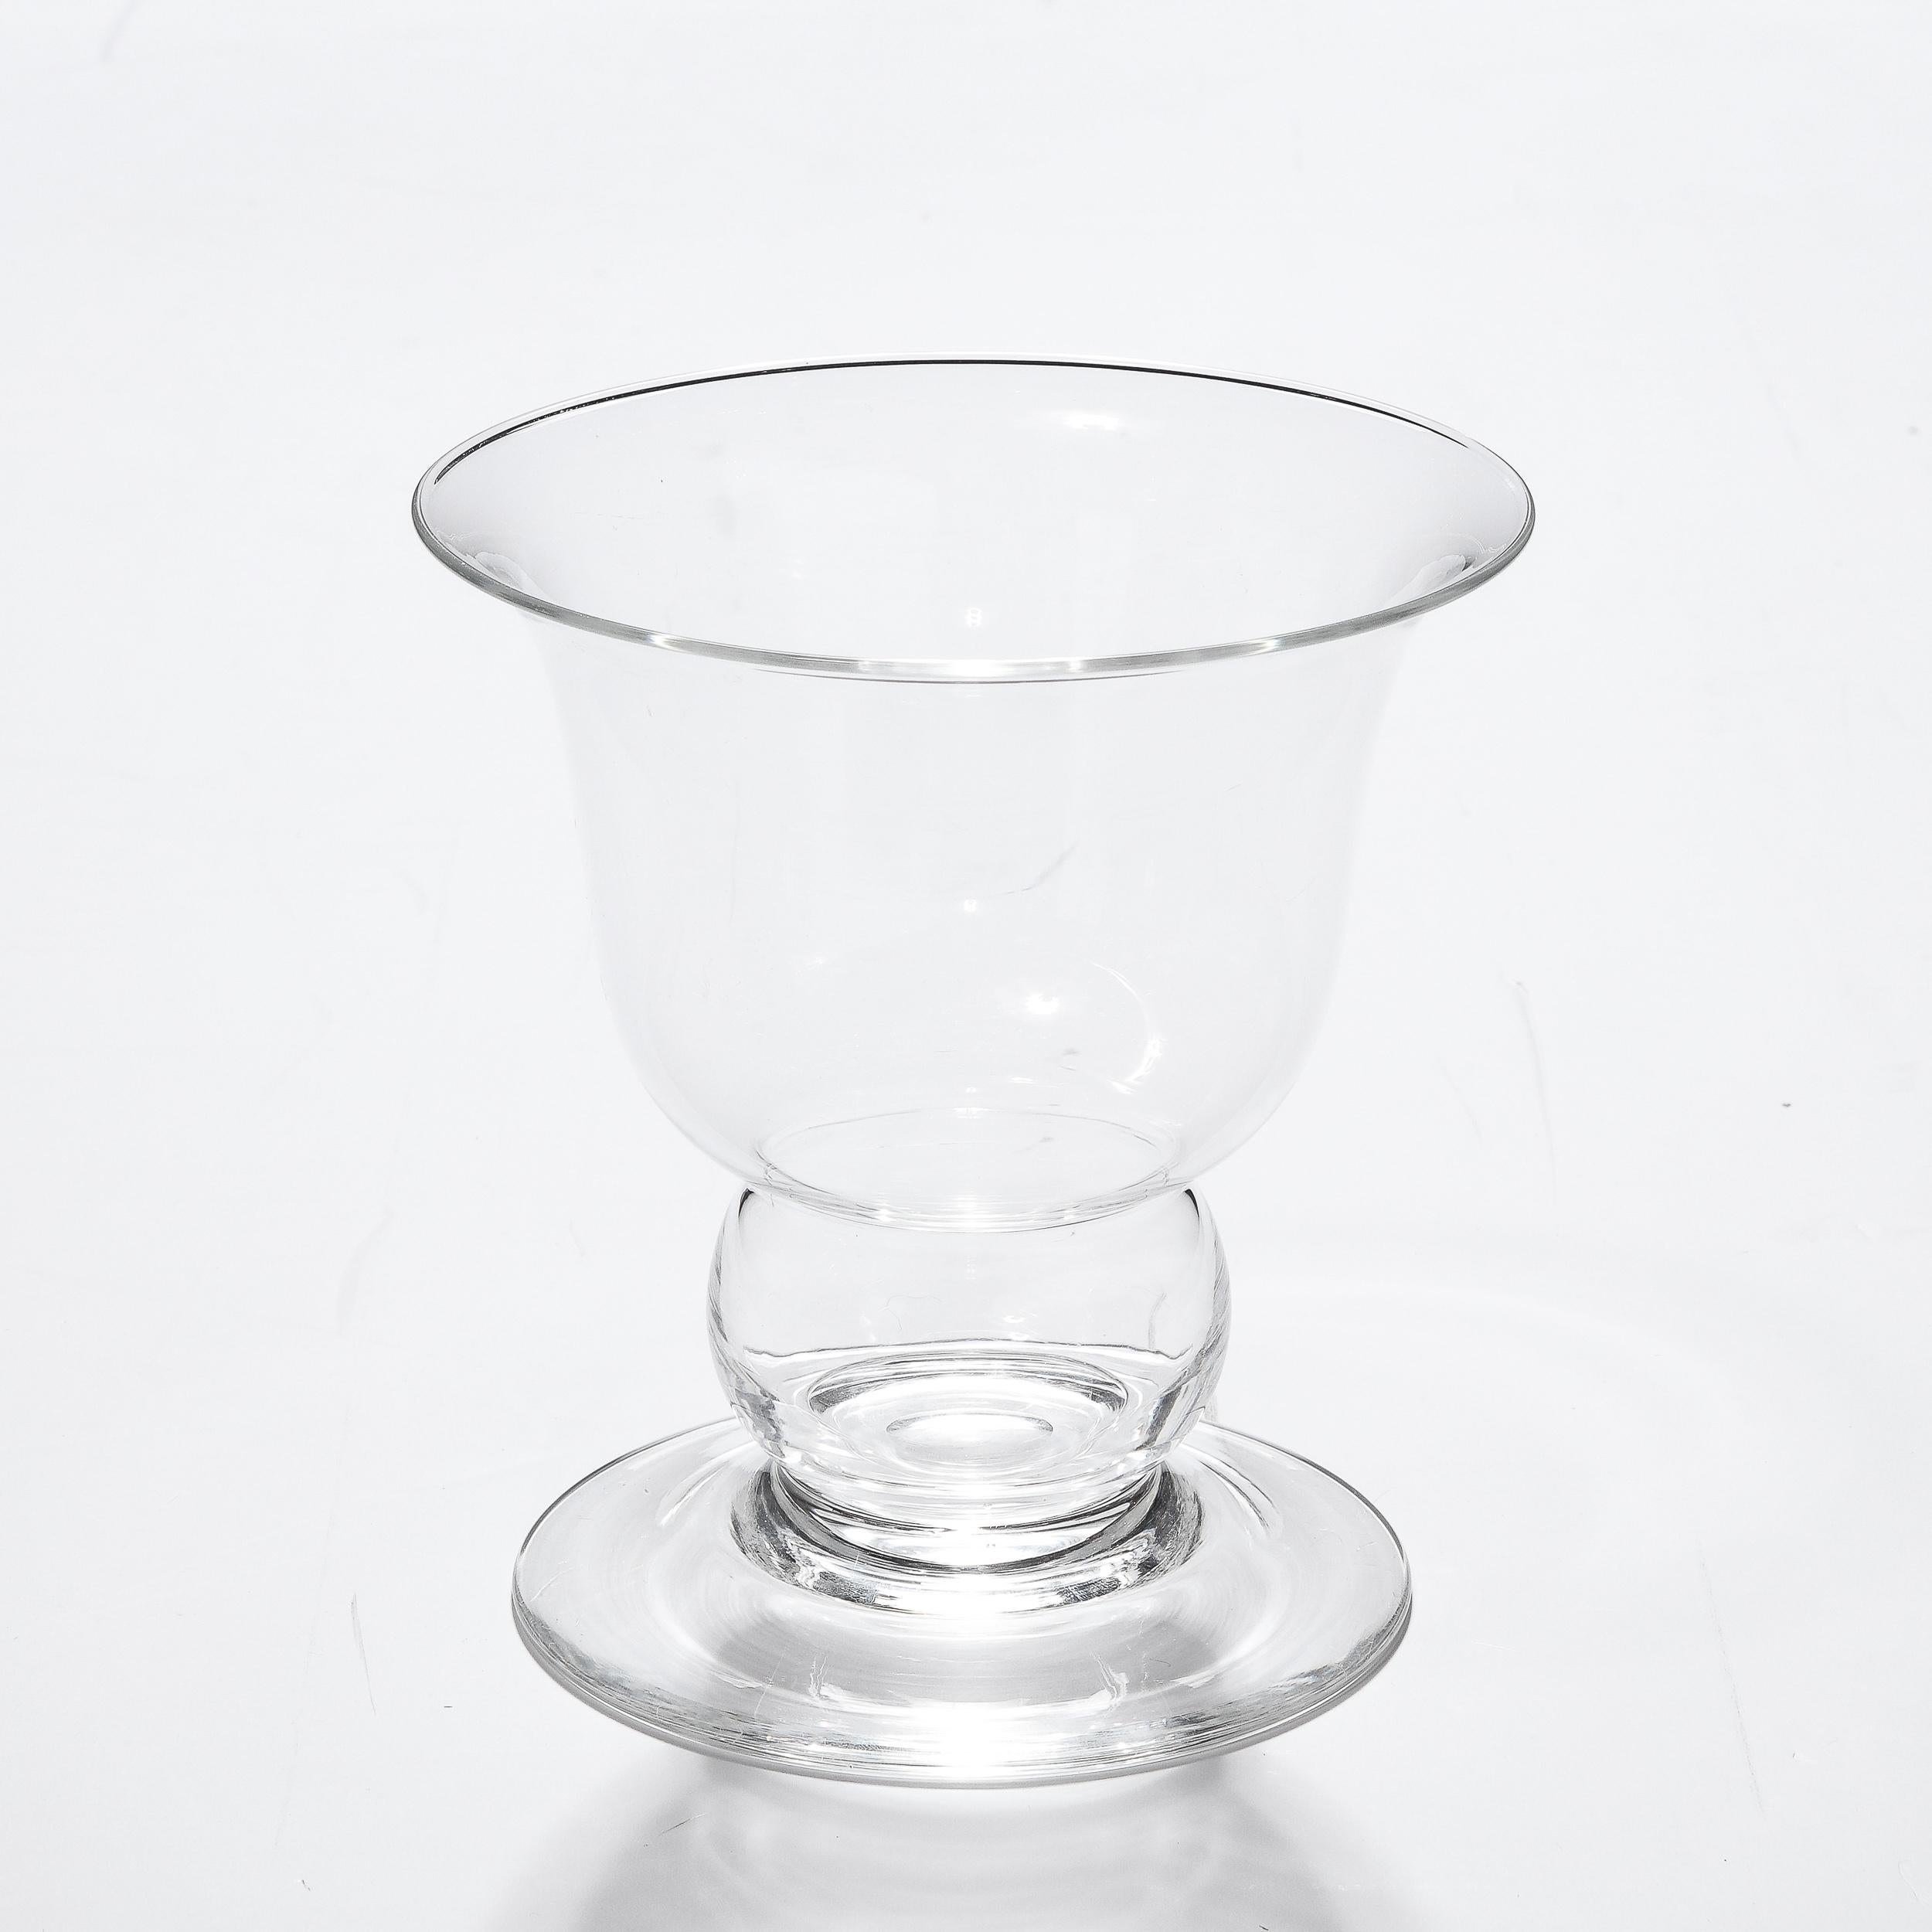 Mid-20th Century Mid-Century Modernist Hand-Blown Glass Vase Signed Steuben For Sale